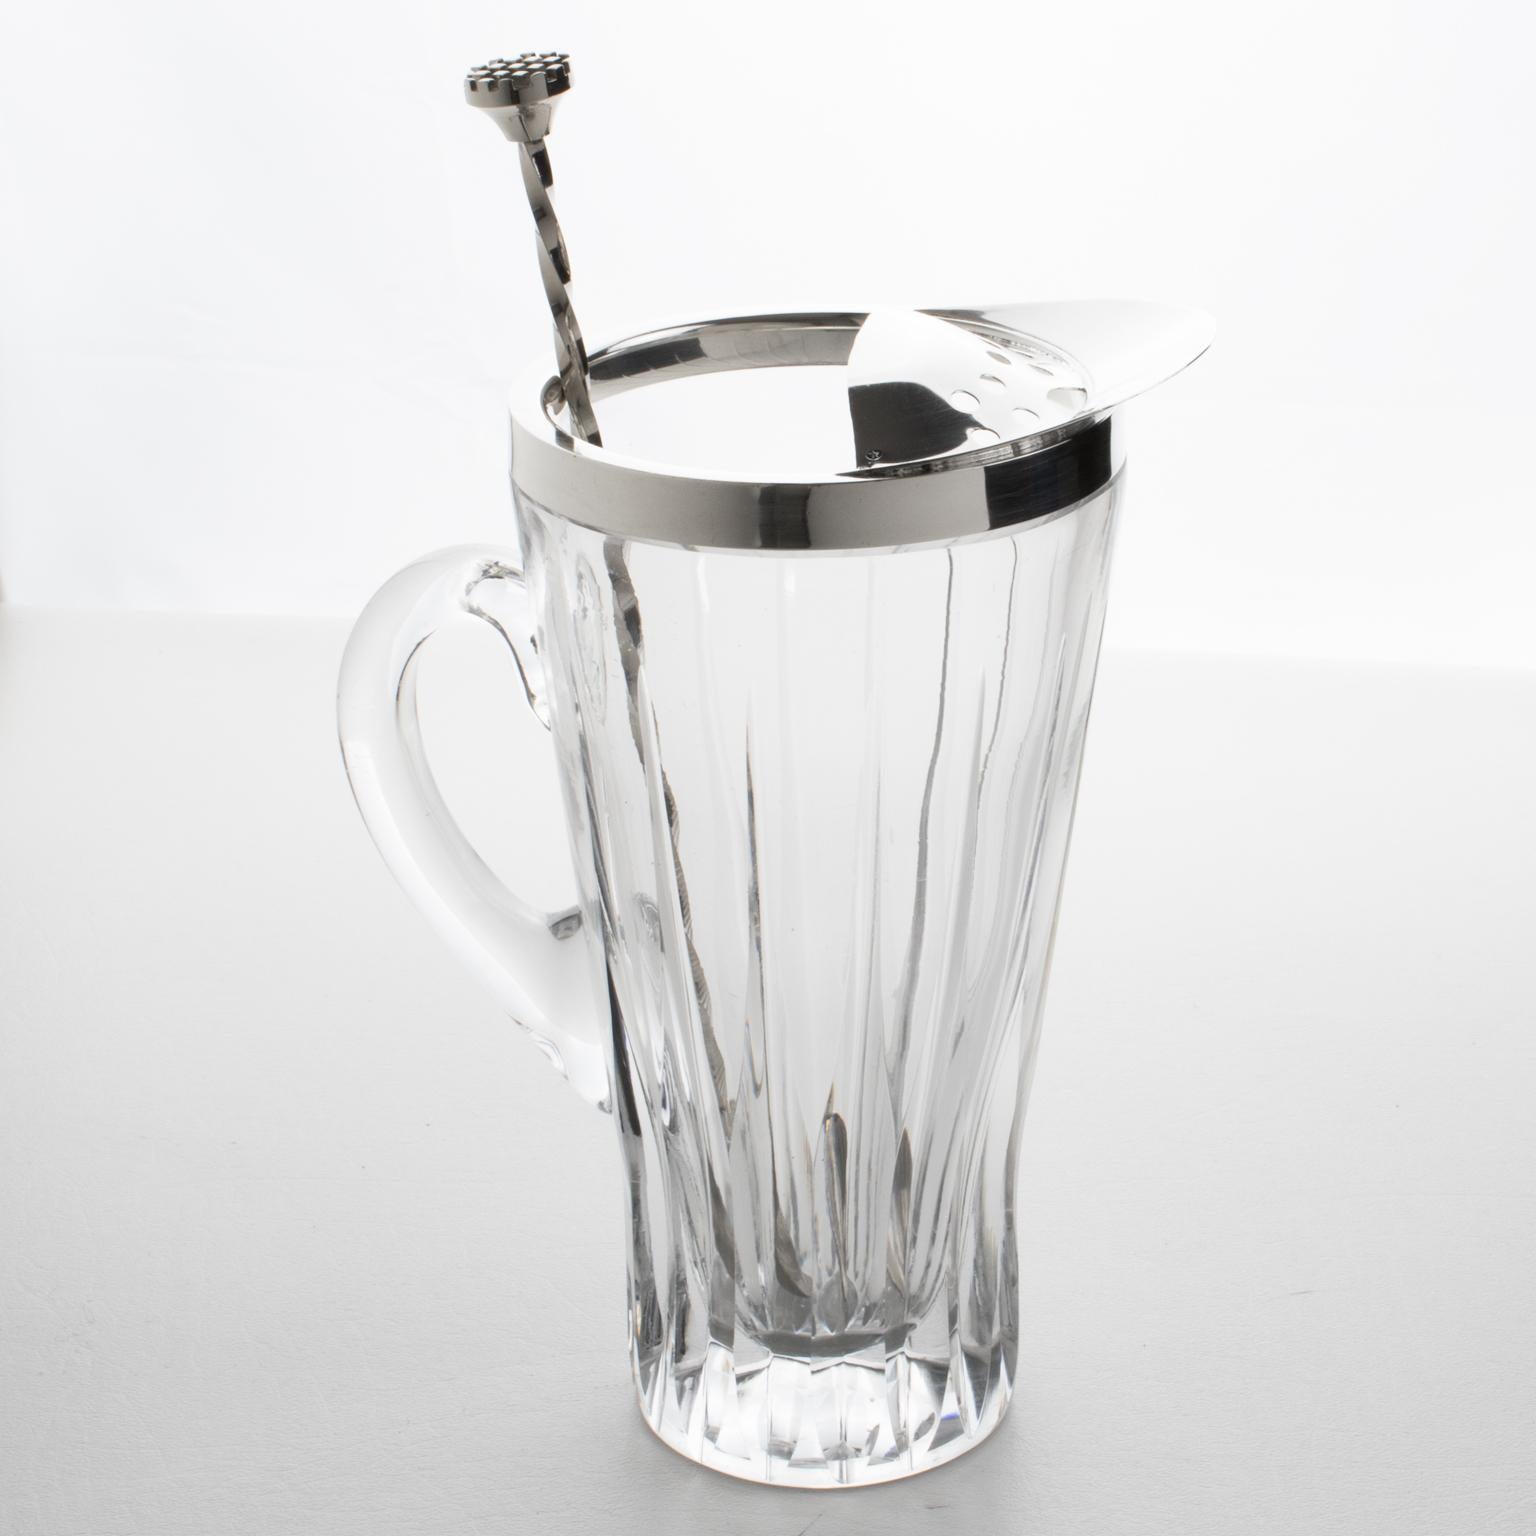 An elegant French 1940s barware Martini cocktail pitcher set. Modernist design with a molded crystal jug topped with a silver plate strainer and pourer. Long silverplate spoon/stirrer to mix the cocktail. Marked in the strainer with legal